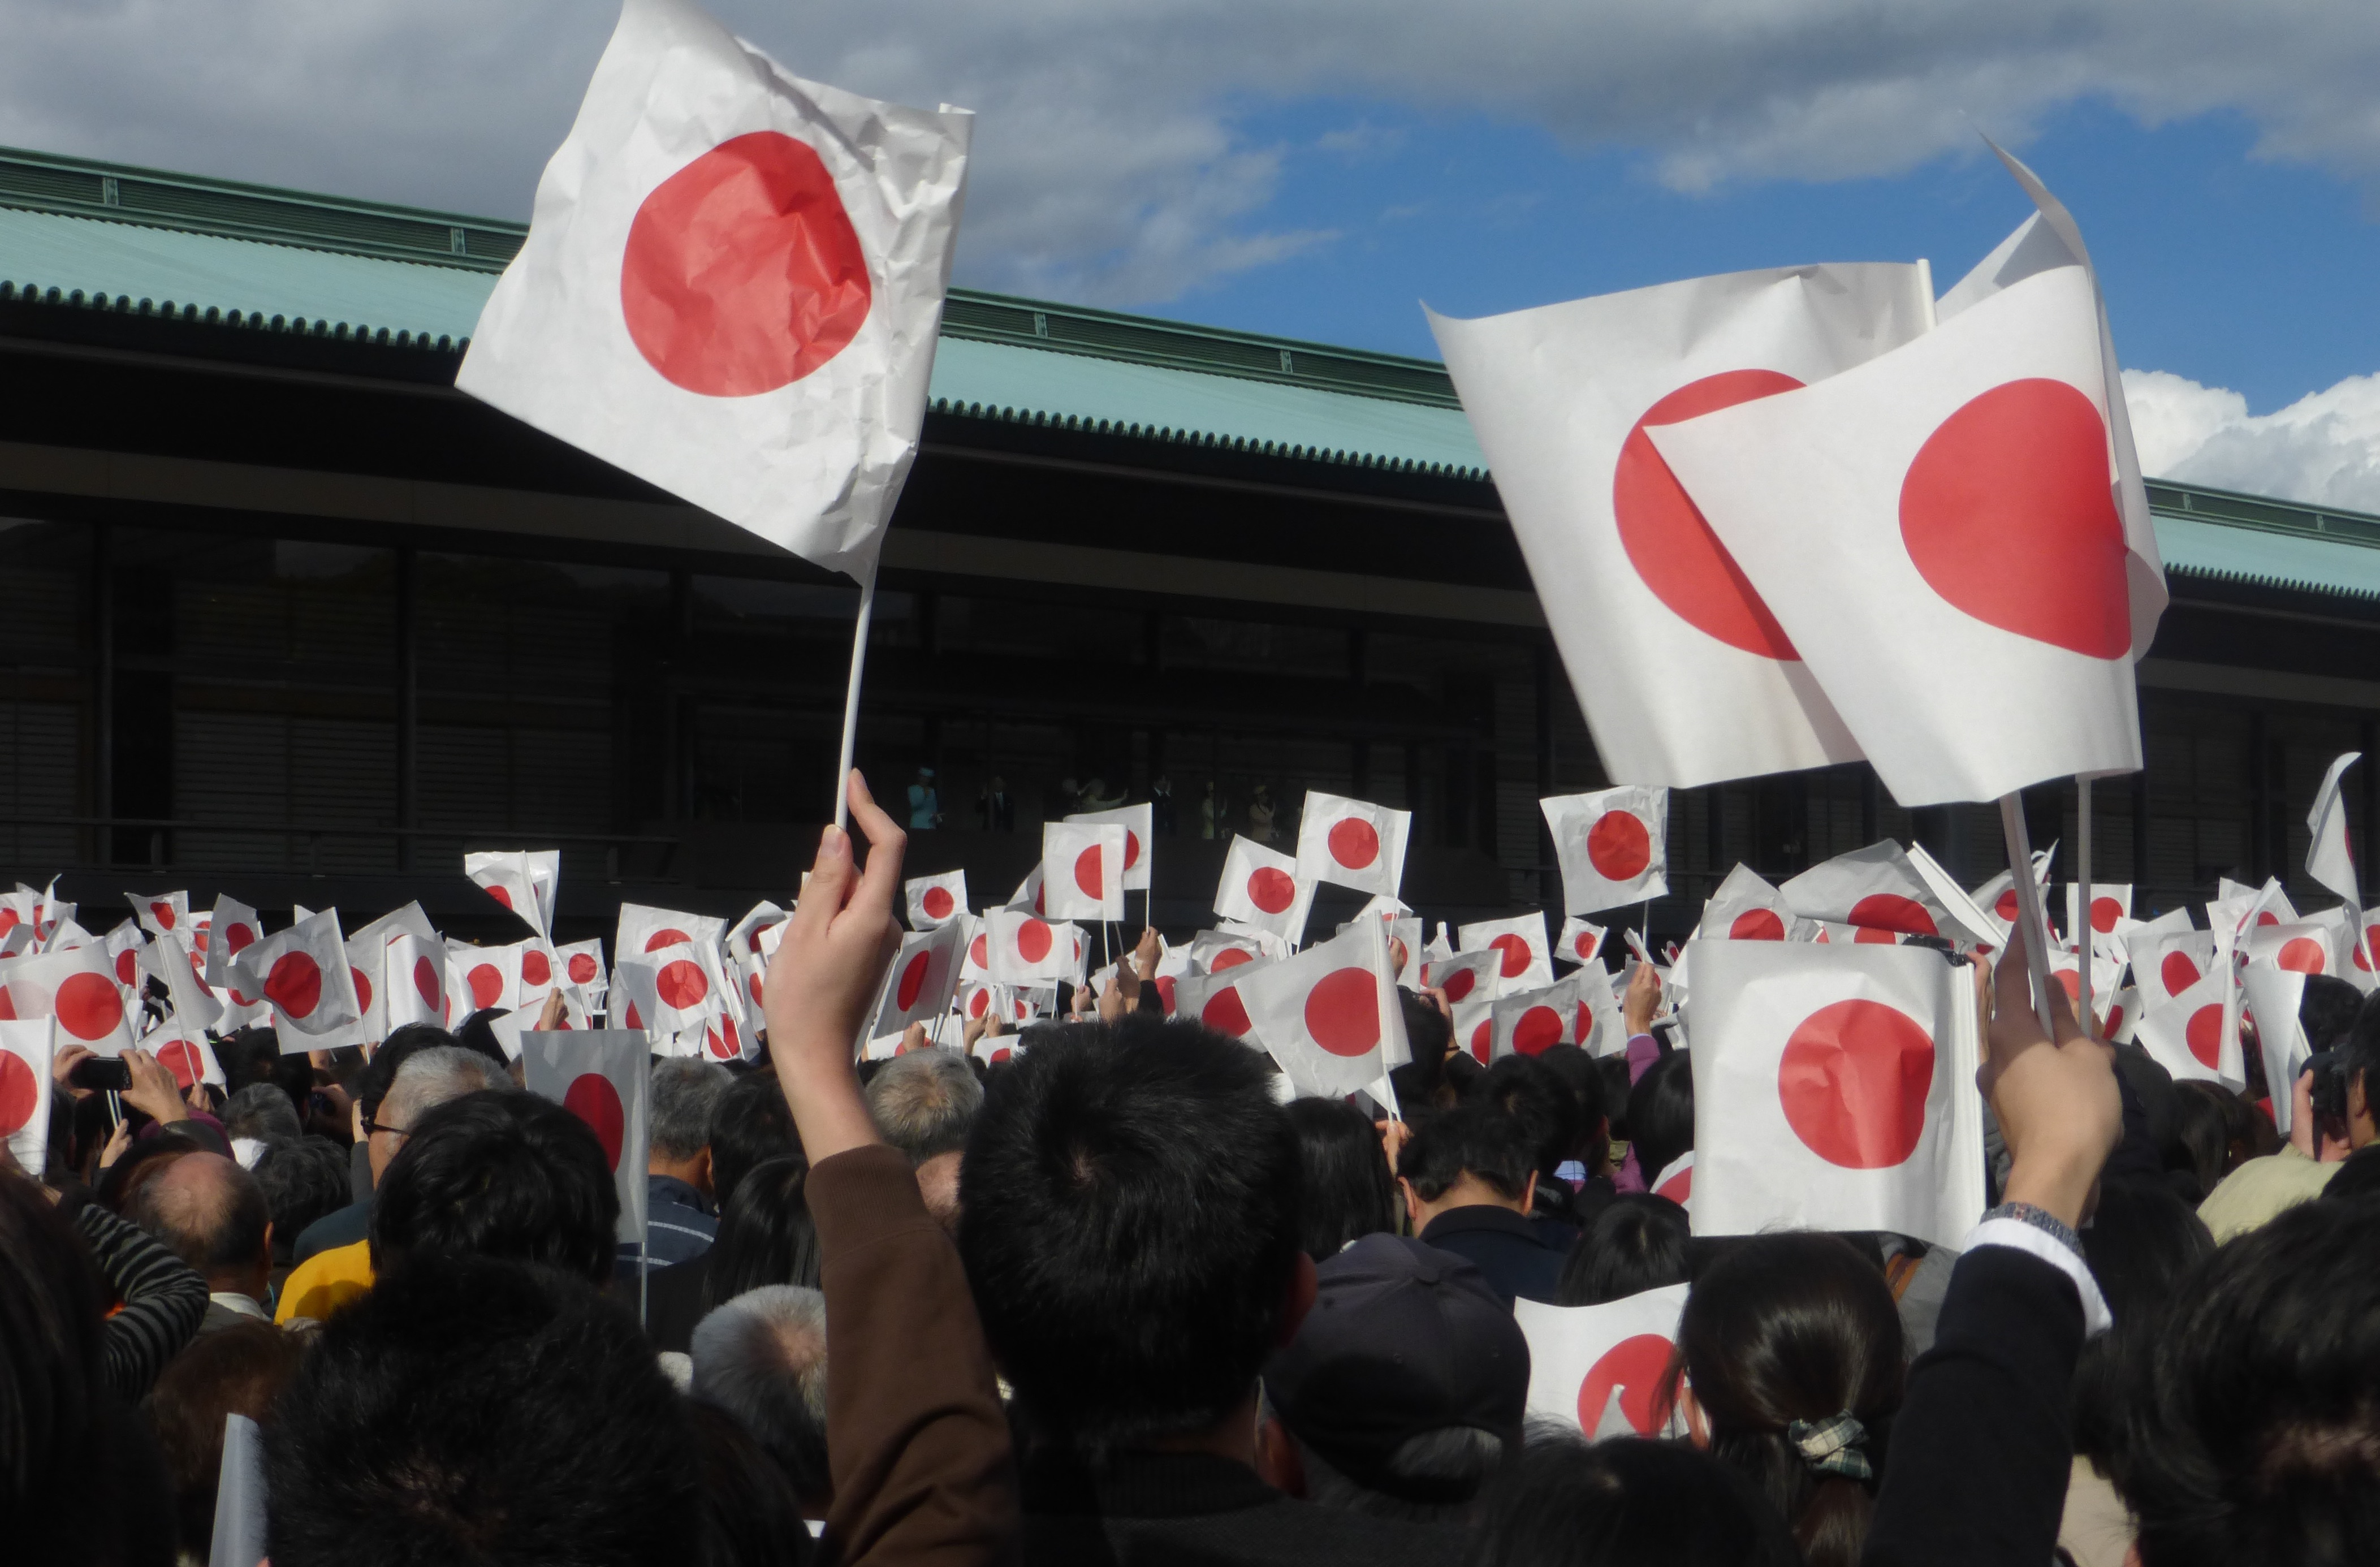 Prime Minister Shinzo Abe and the JDF: The Regional Implications of Repealing Article 9